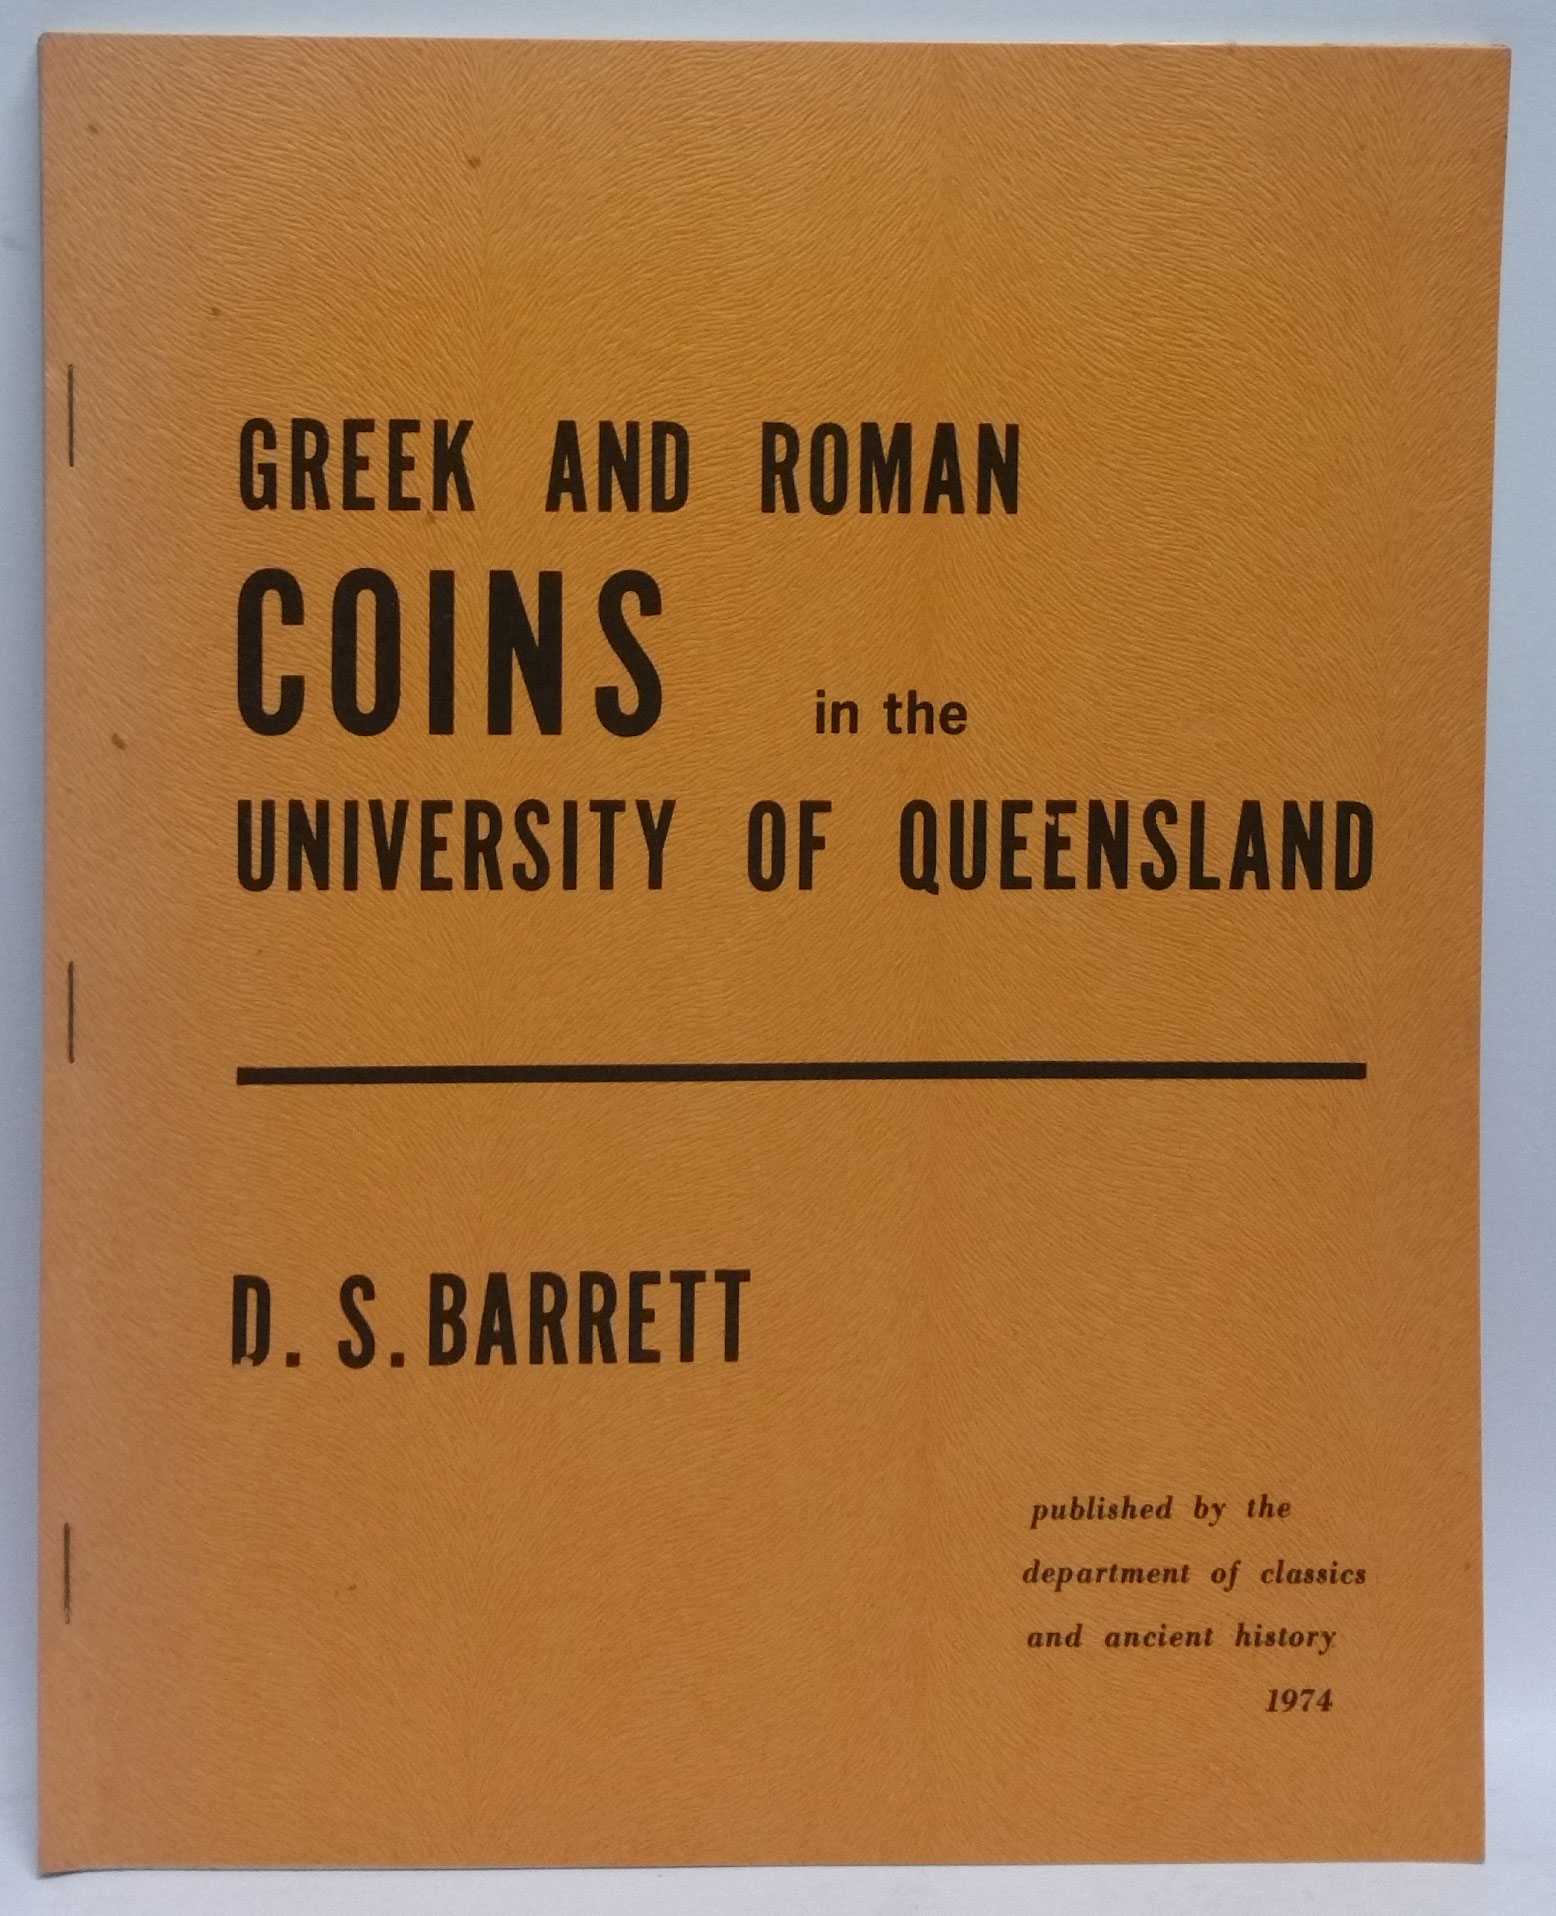 D. S. Barrett - Greek and Roman Coins in the University of Queensland